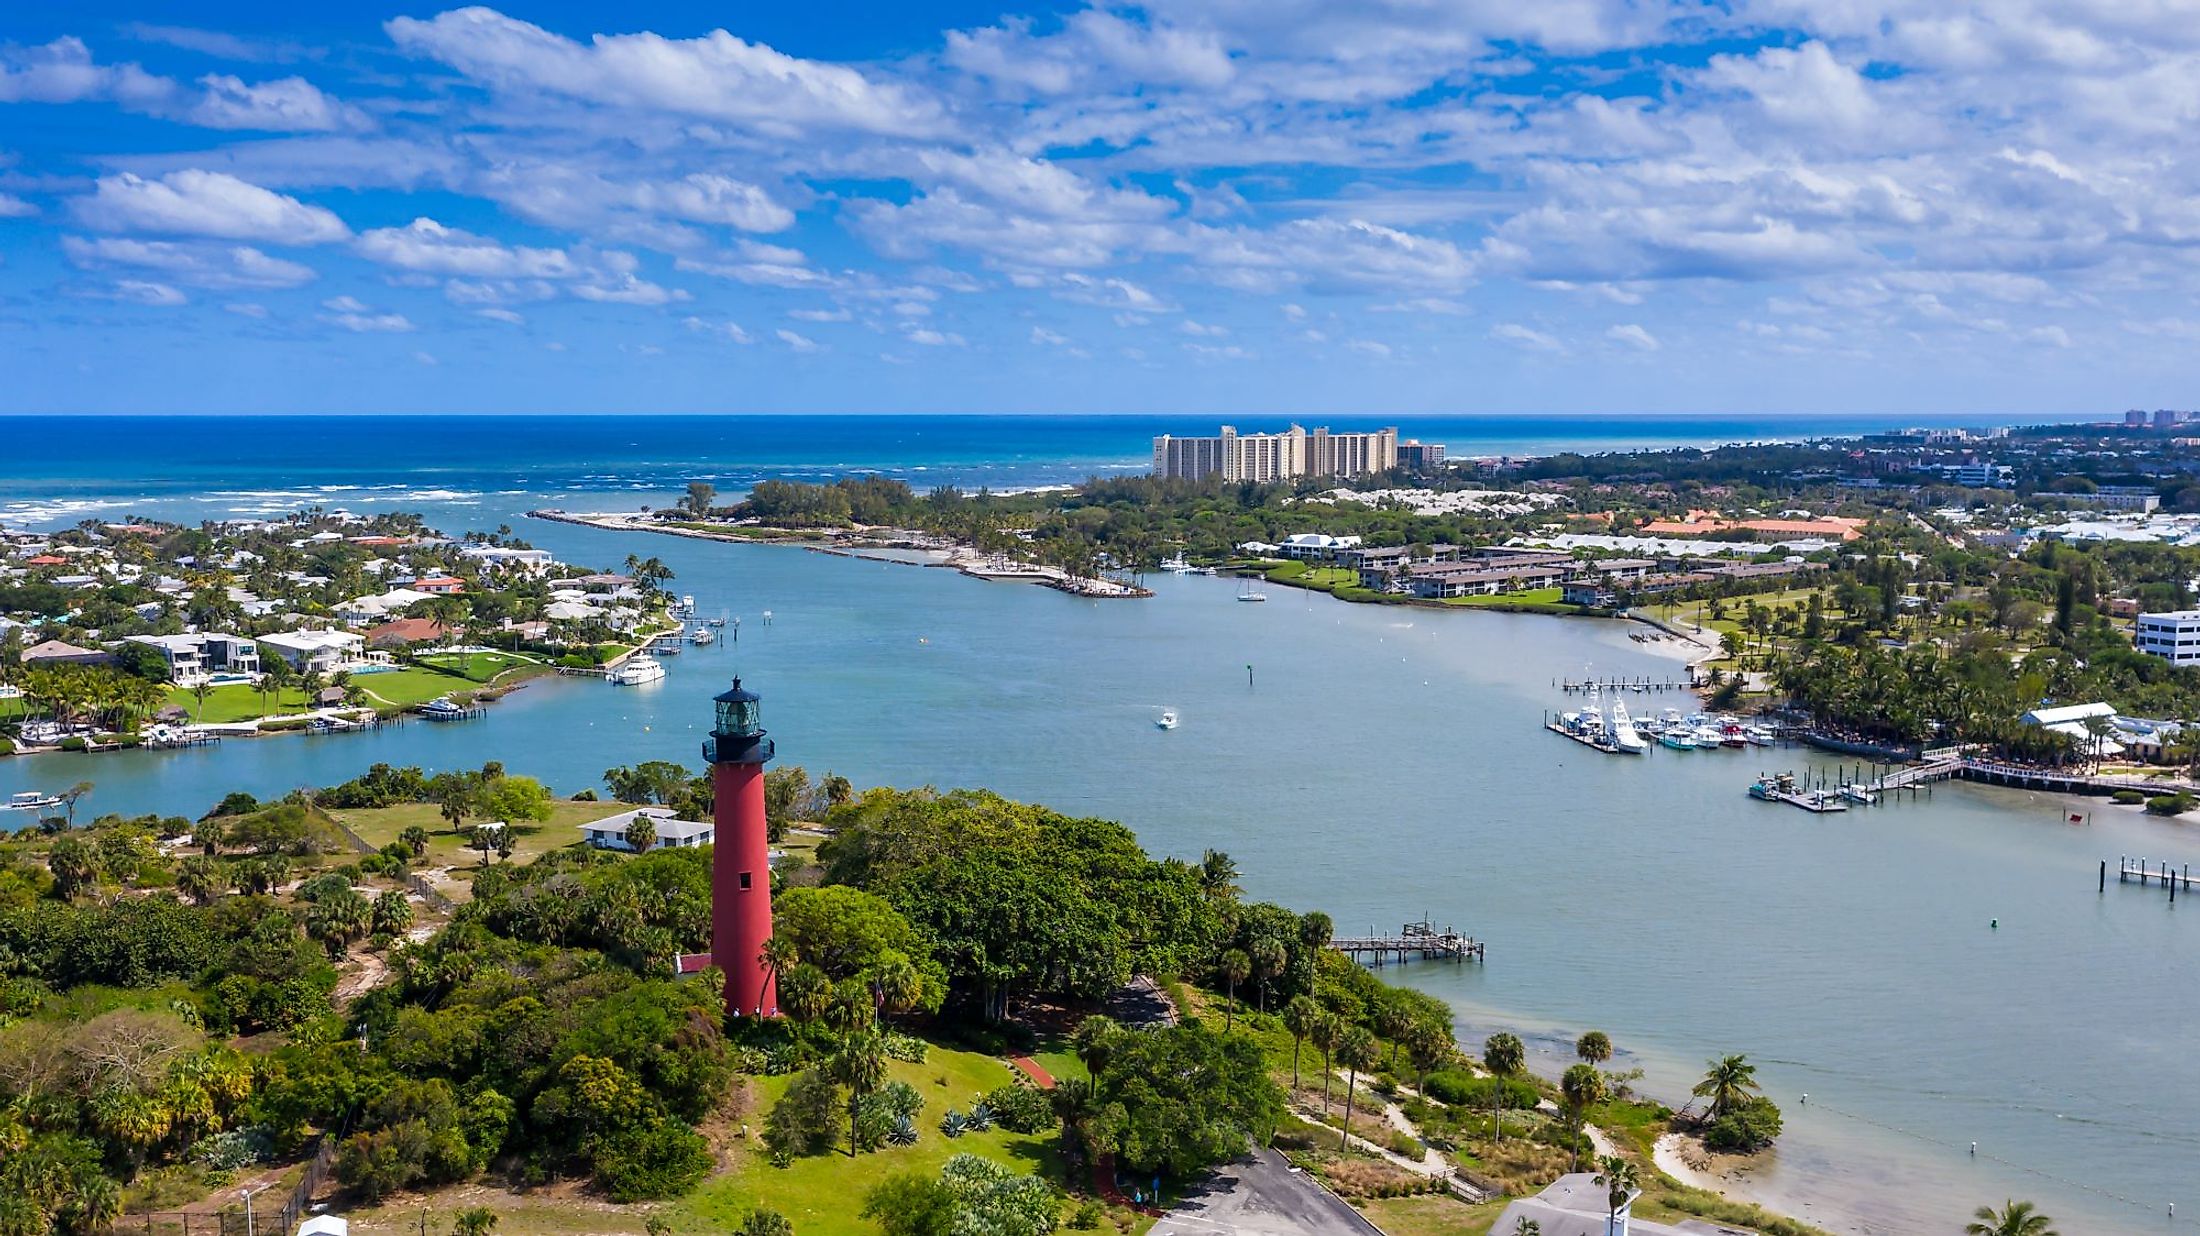 On a hill overlooking the Loxahatchee River, the red Jupiter Inlet Lighthouse offers panoramic views. 